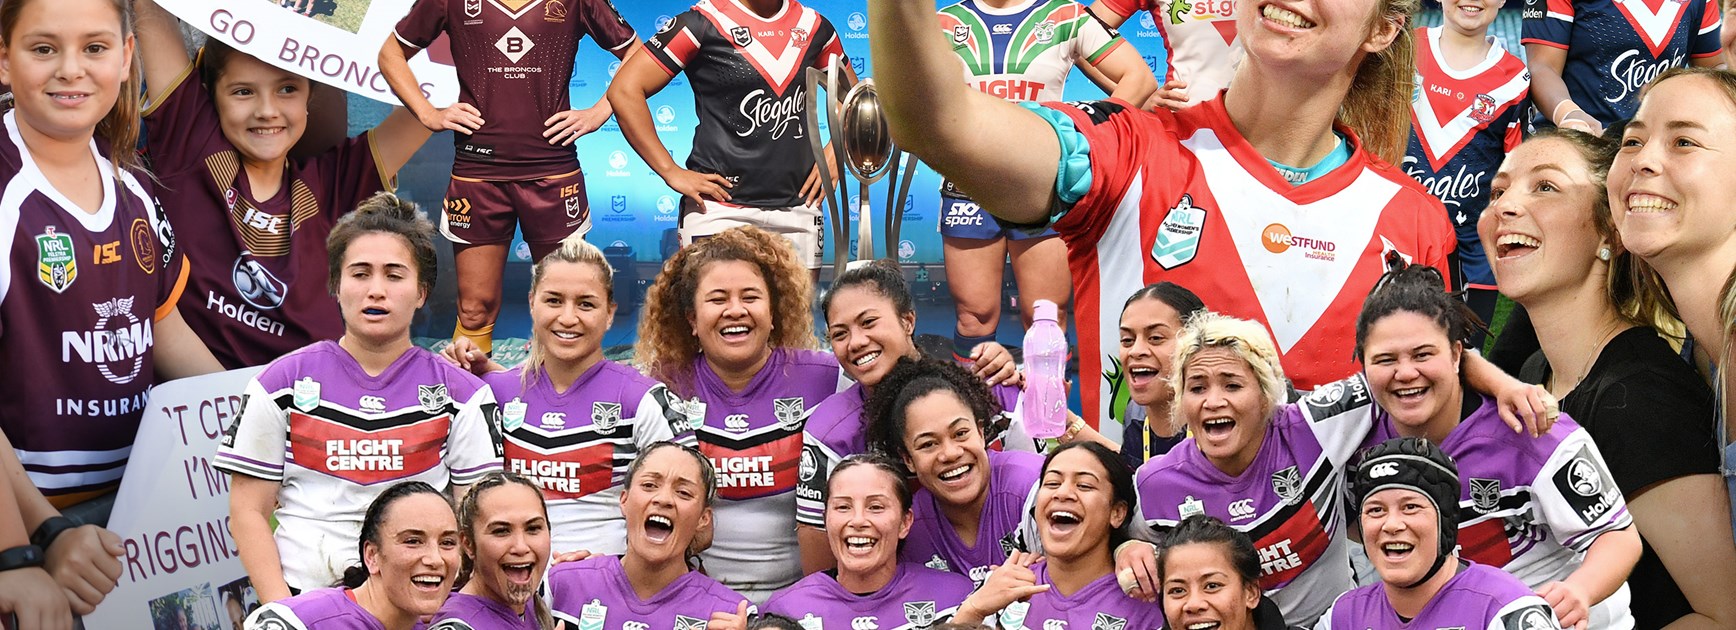 Kezie's Dragons the team to beat for 2019 NRLW title